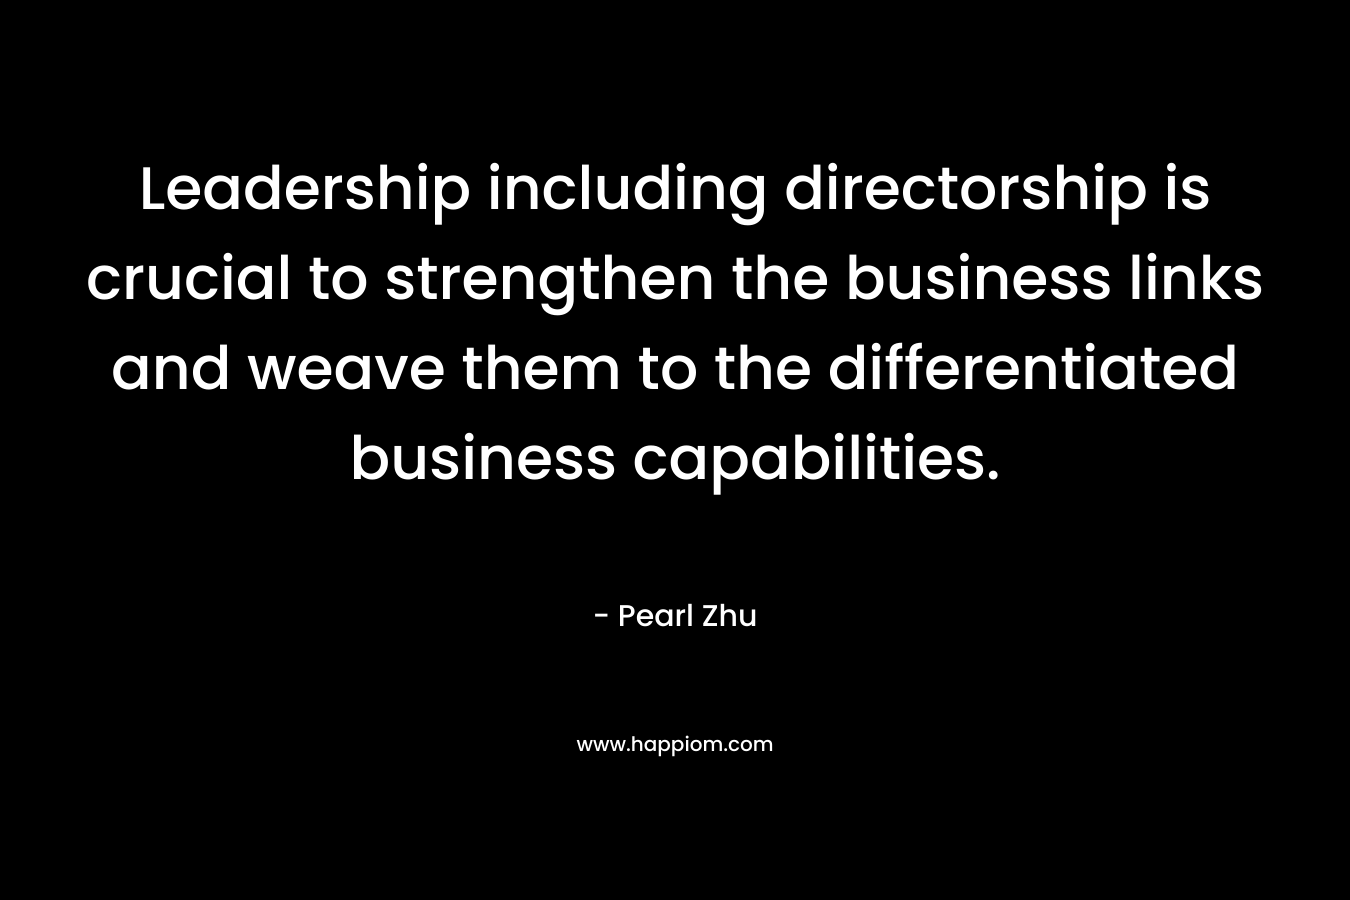 Leadership including directorship is crucial to strengthen the business links and weave them to the differentiated business capabilities. – Pearl Zhu